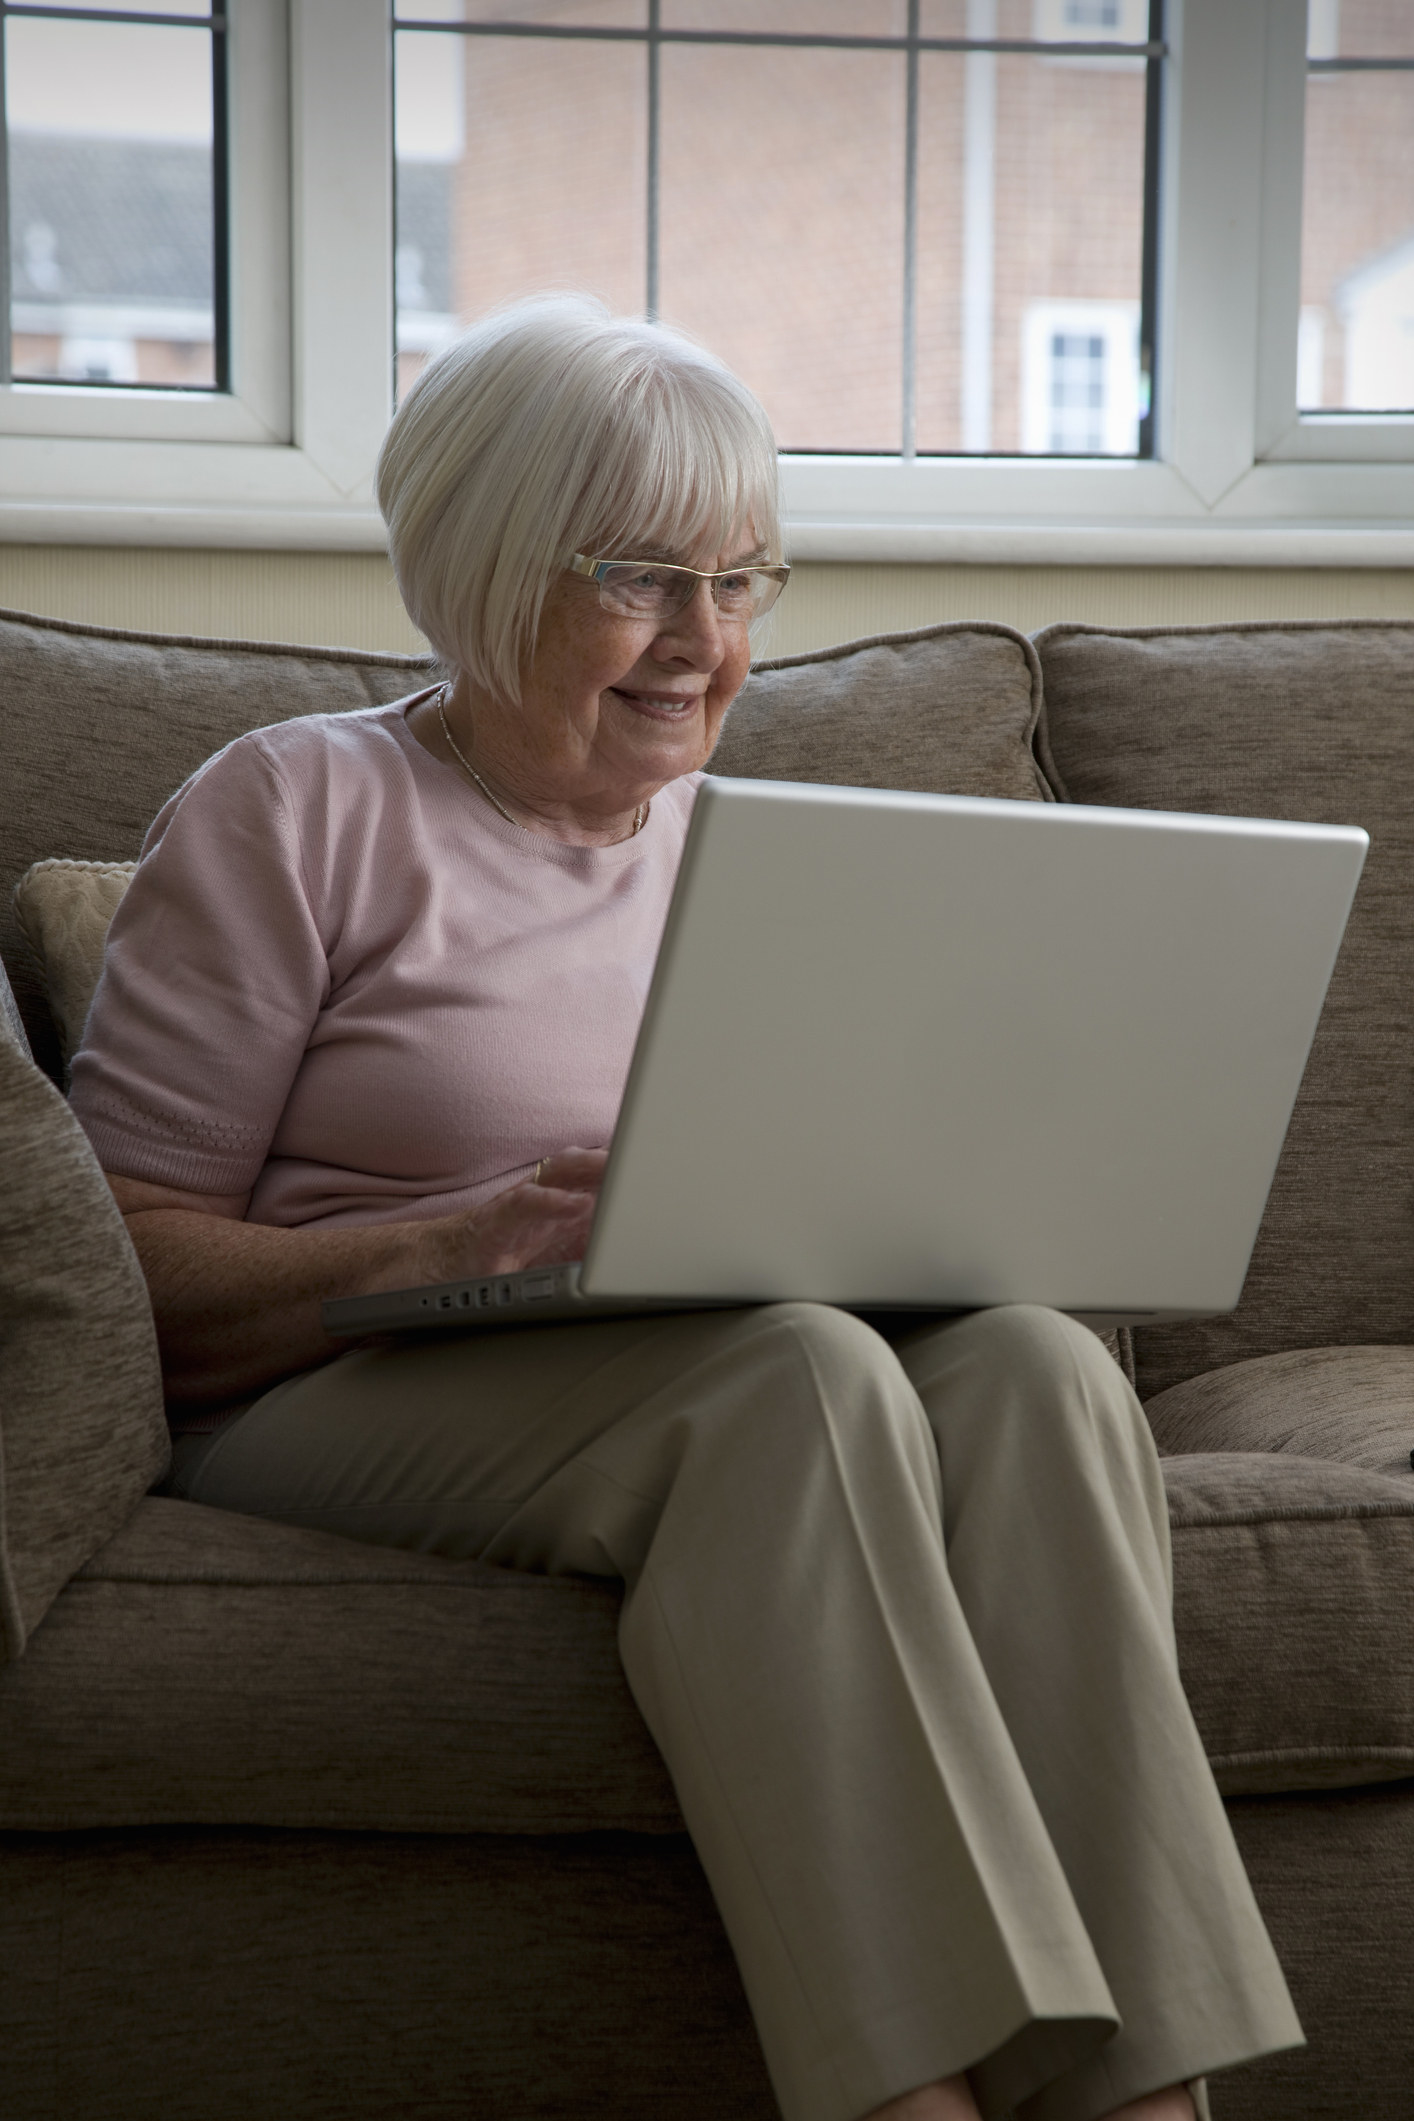 An elderly woman smiling while using her laptop.